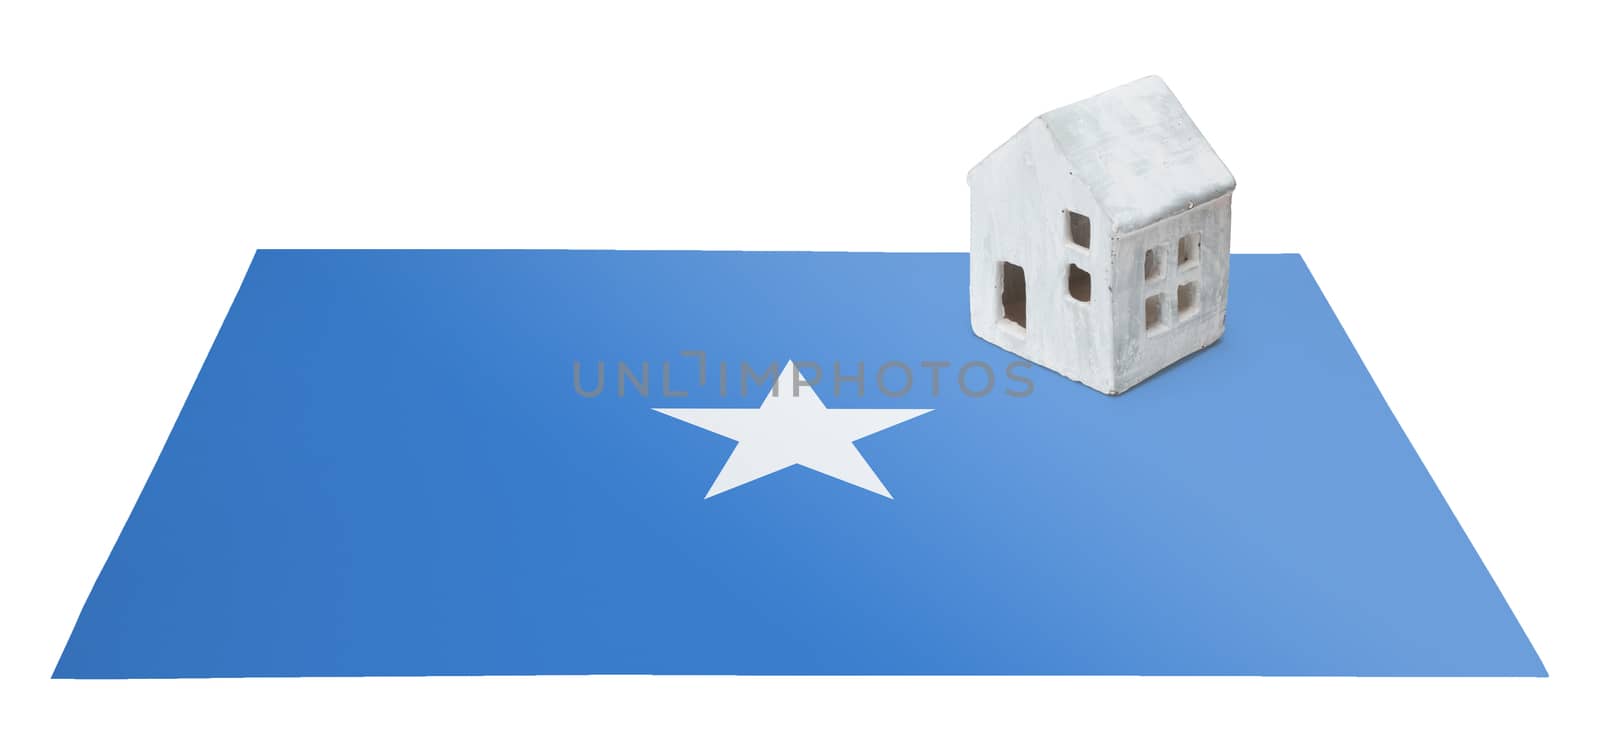 Small house on a flag - Somalia by michaklootwijk